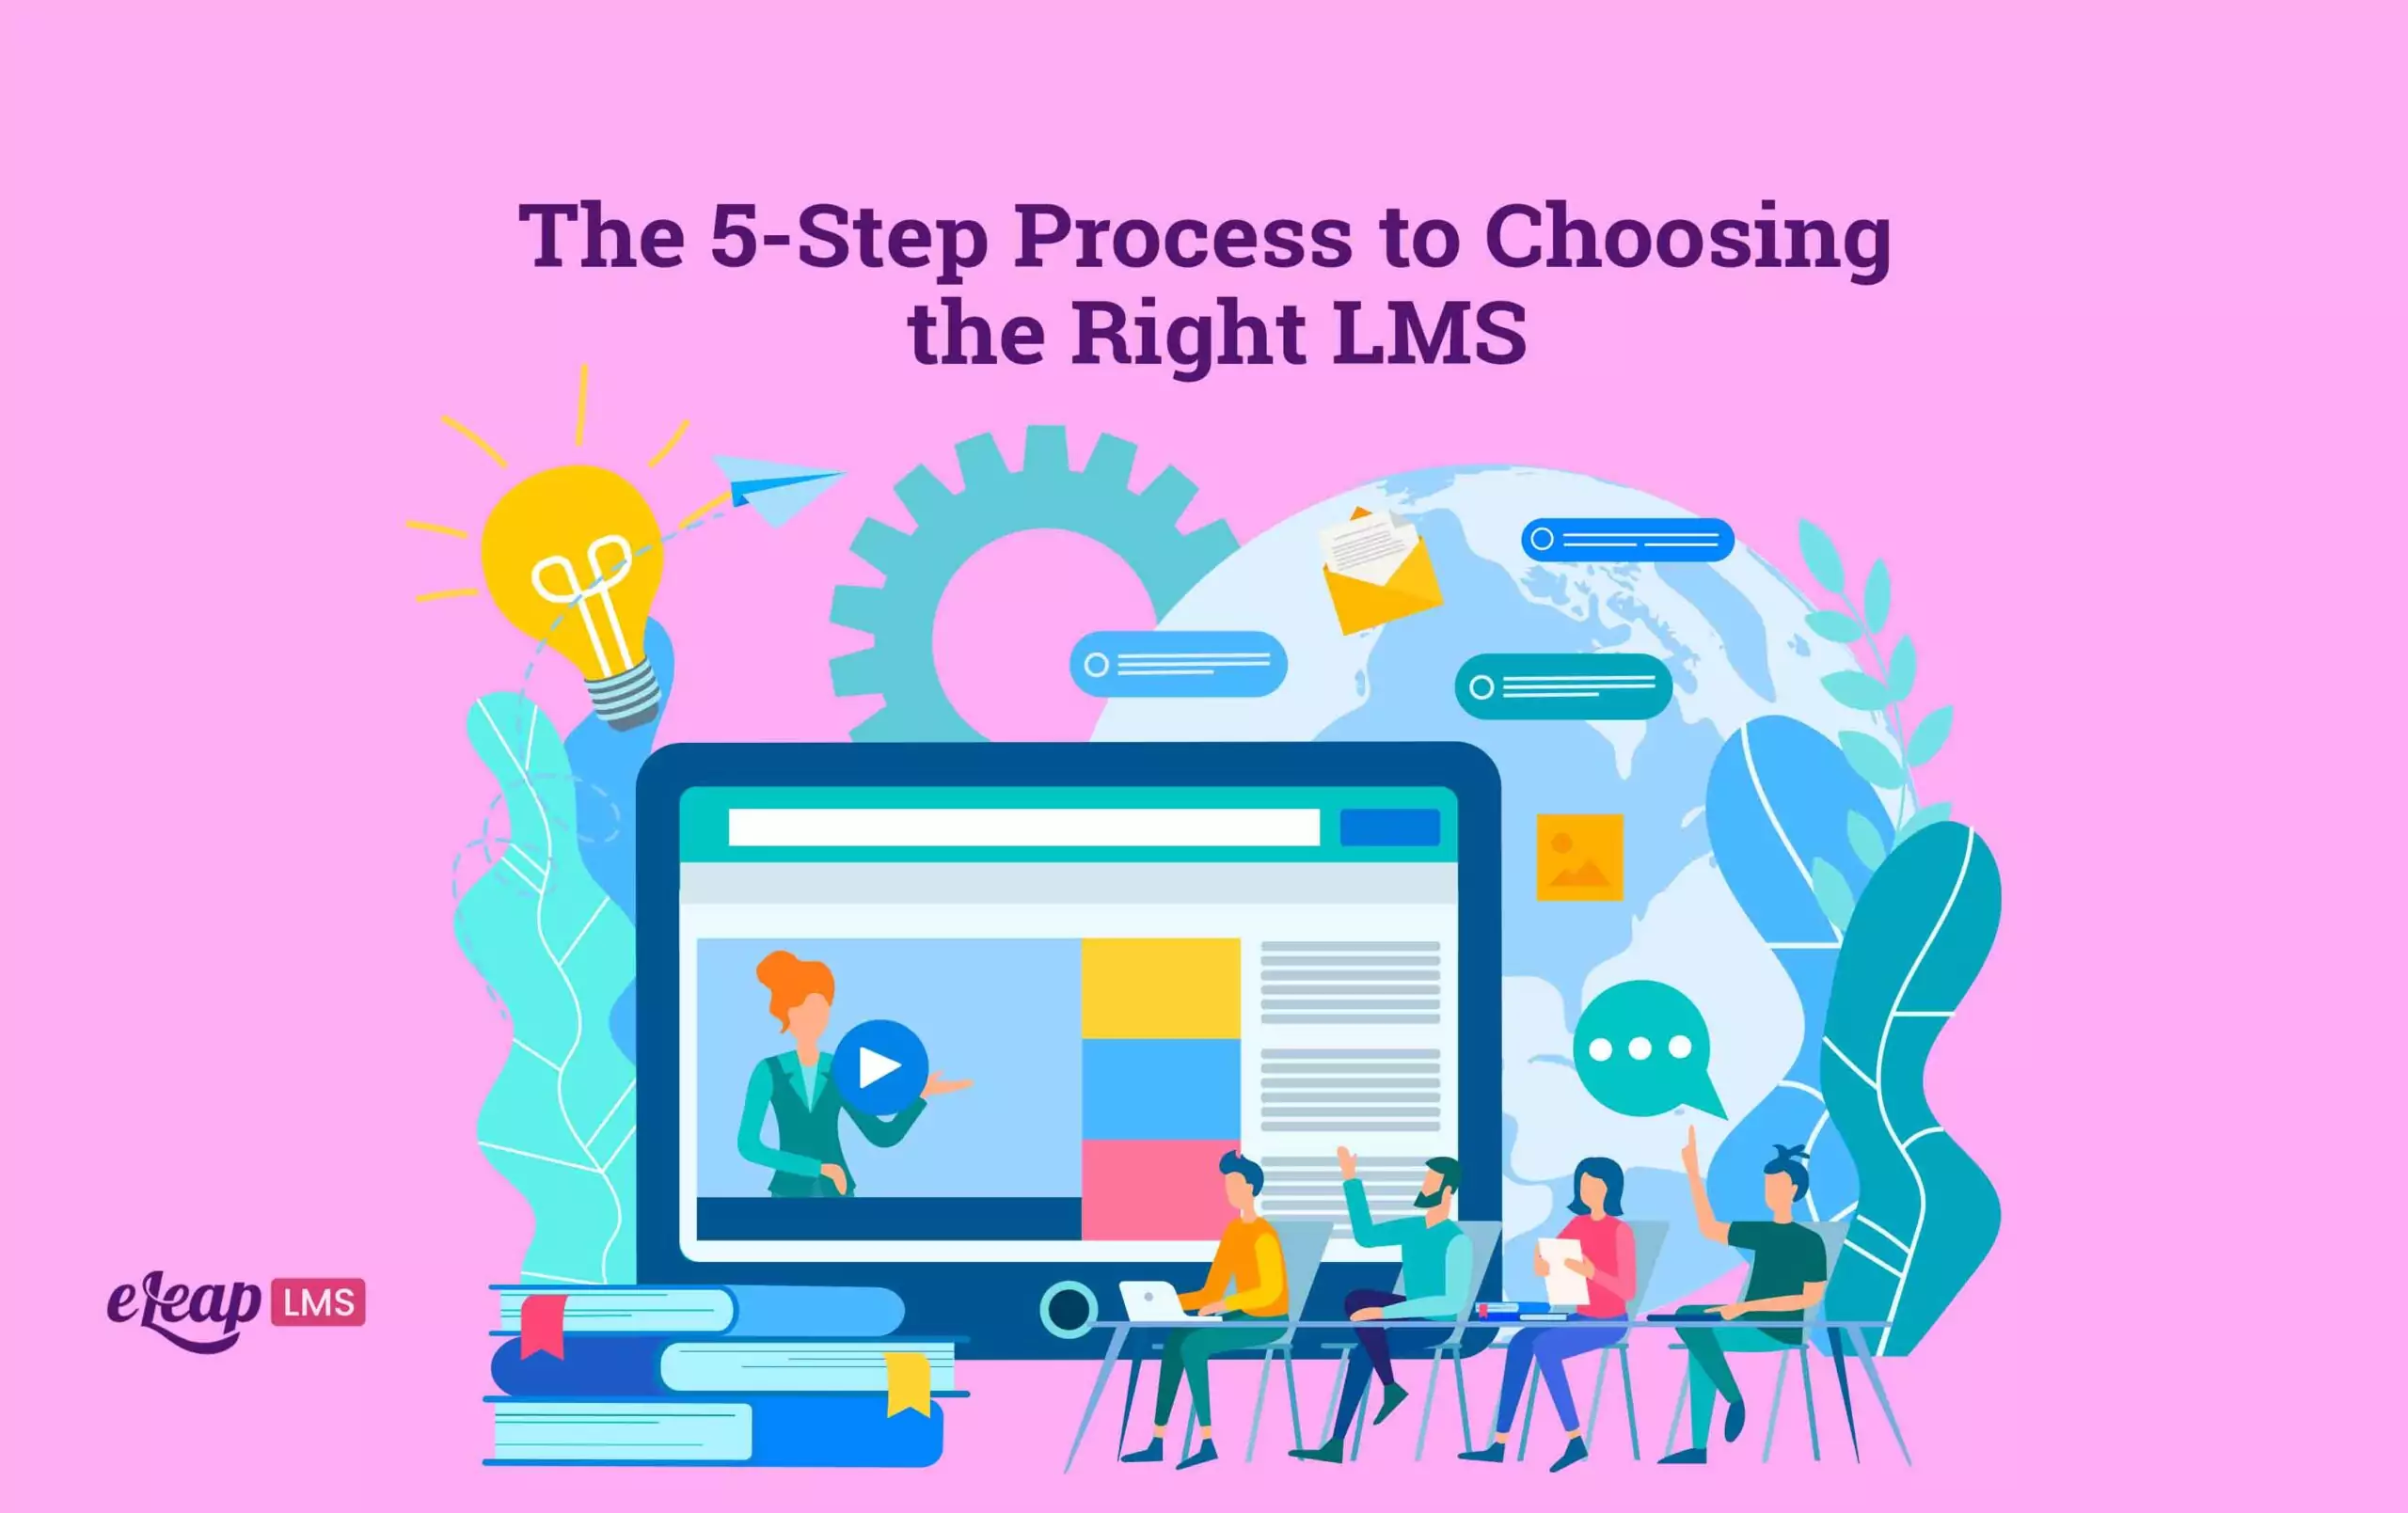 The Right LMS